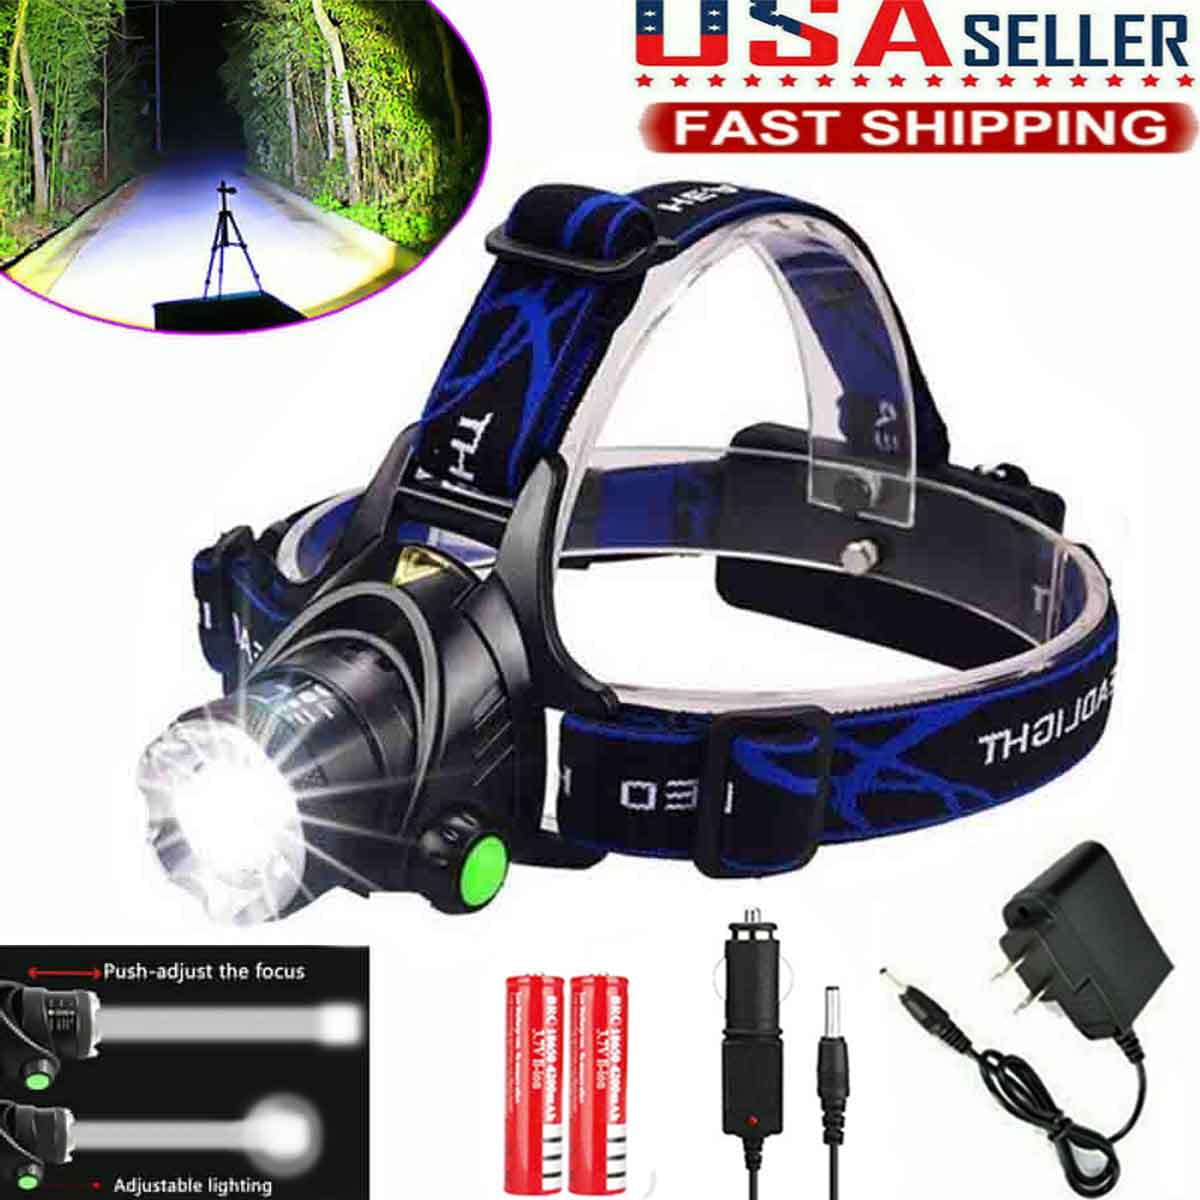 Zoom 250000LM Headlamp Rechargeable LED Headlight 18650 Flashlight Head Torch US 